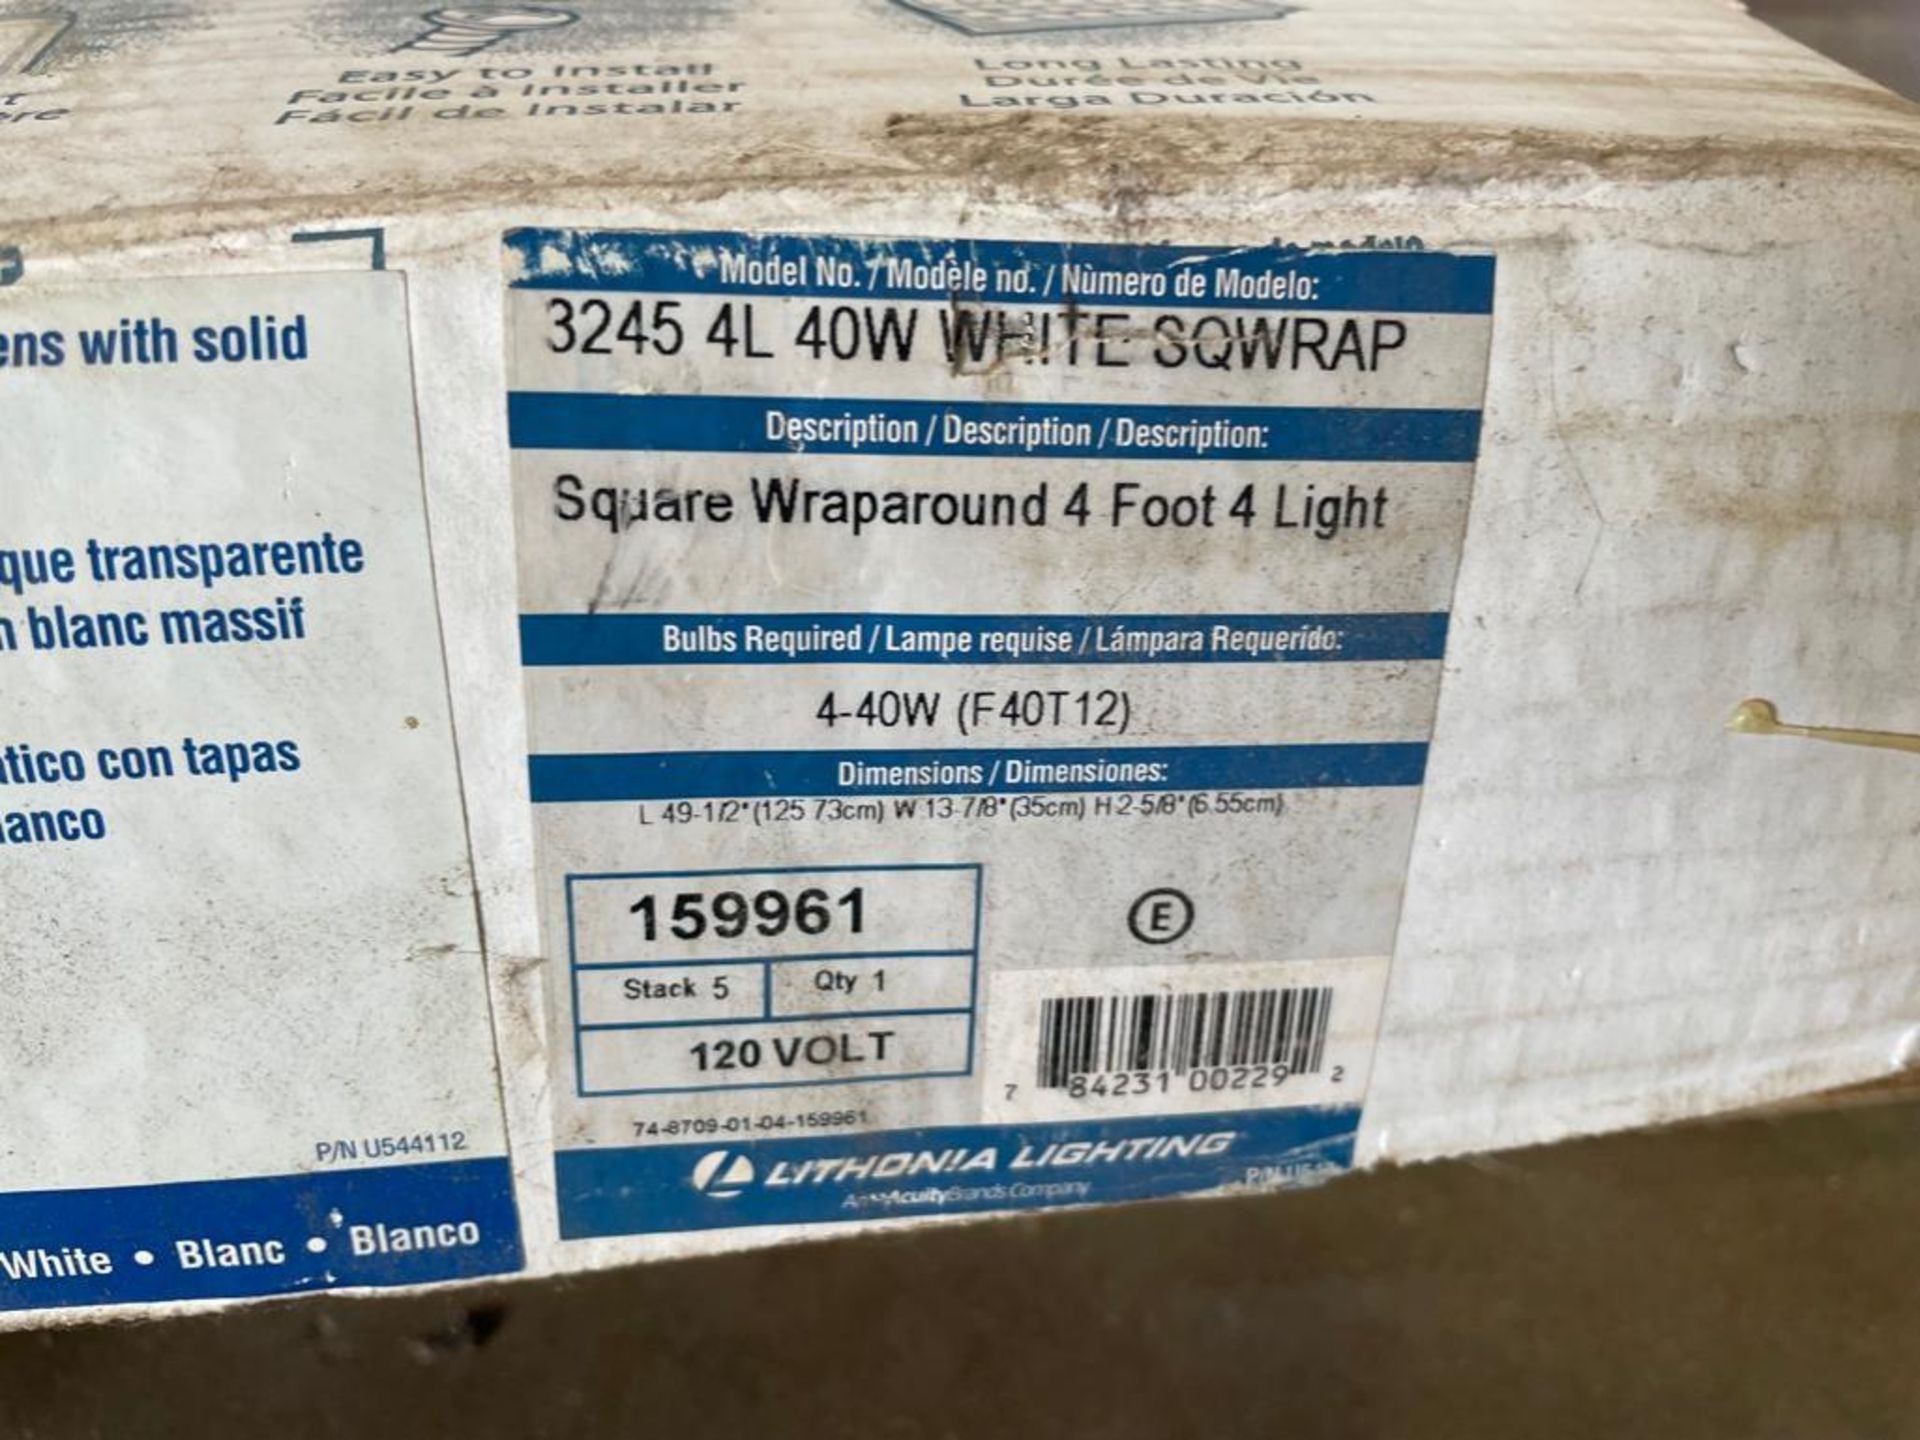 Pallet Fluorescent Light Bulbs & Square Profile Wrap. Located in Hazelwood, MO - Image 7 of 10